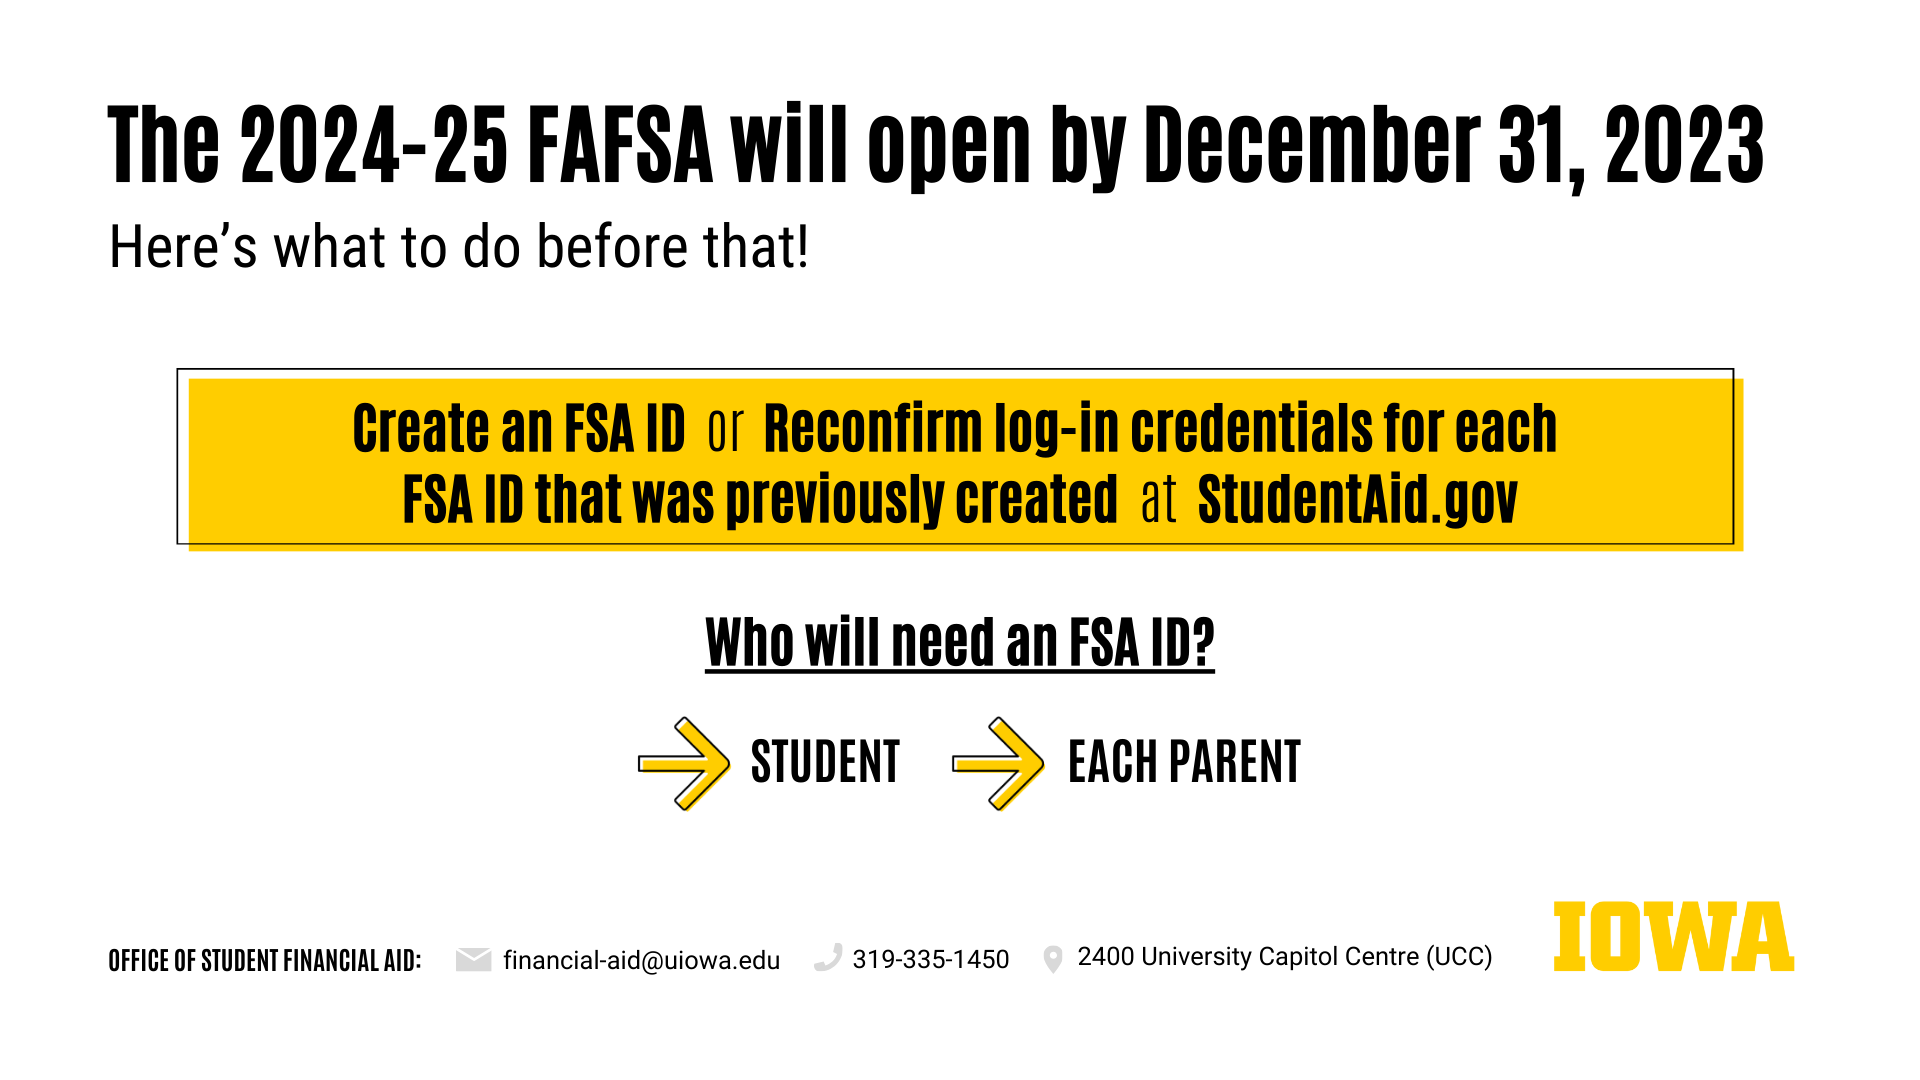 The 2024-25 FAFSA will open by December 31, 2023. Here's what to do before that! Create or reconfirm your FSA ID. Who will need an FSA ID? Student and each parent.